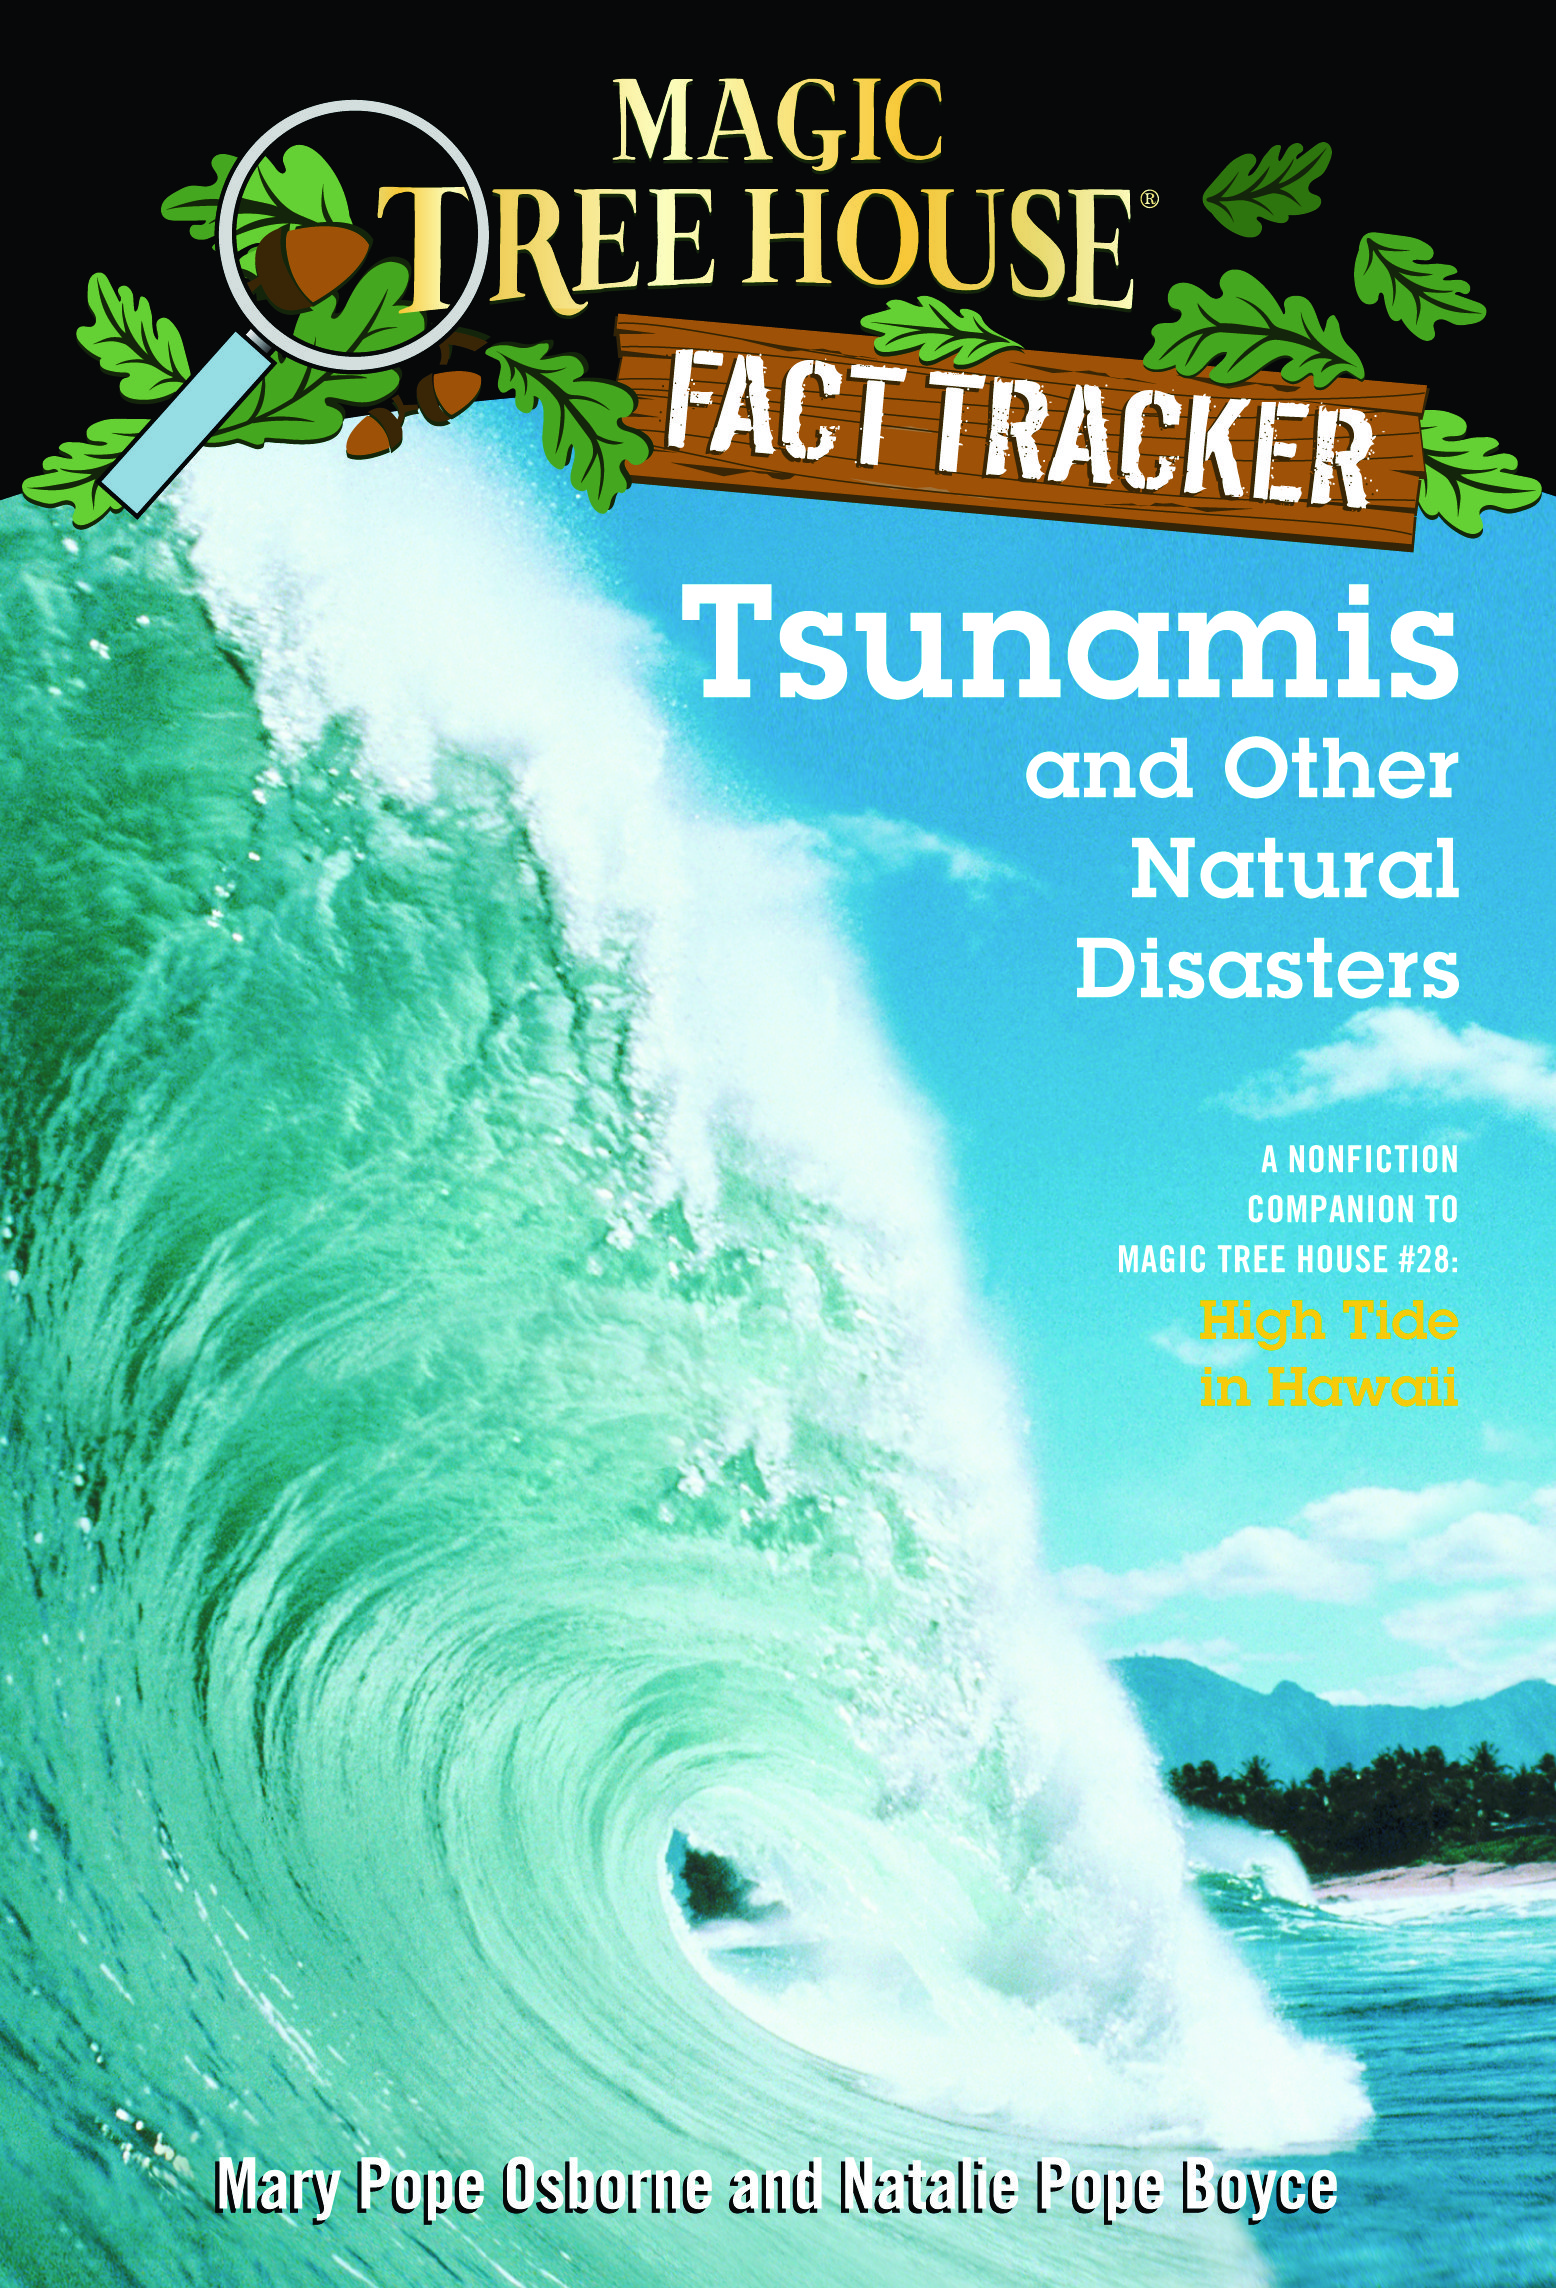 Magic Tree House Fact Tracker #15 Tsunamis and Other Natural Disasters